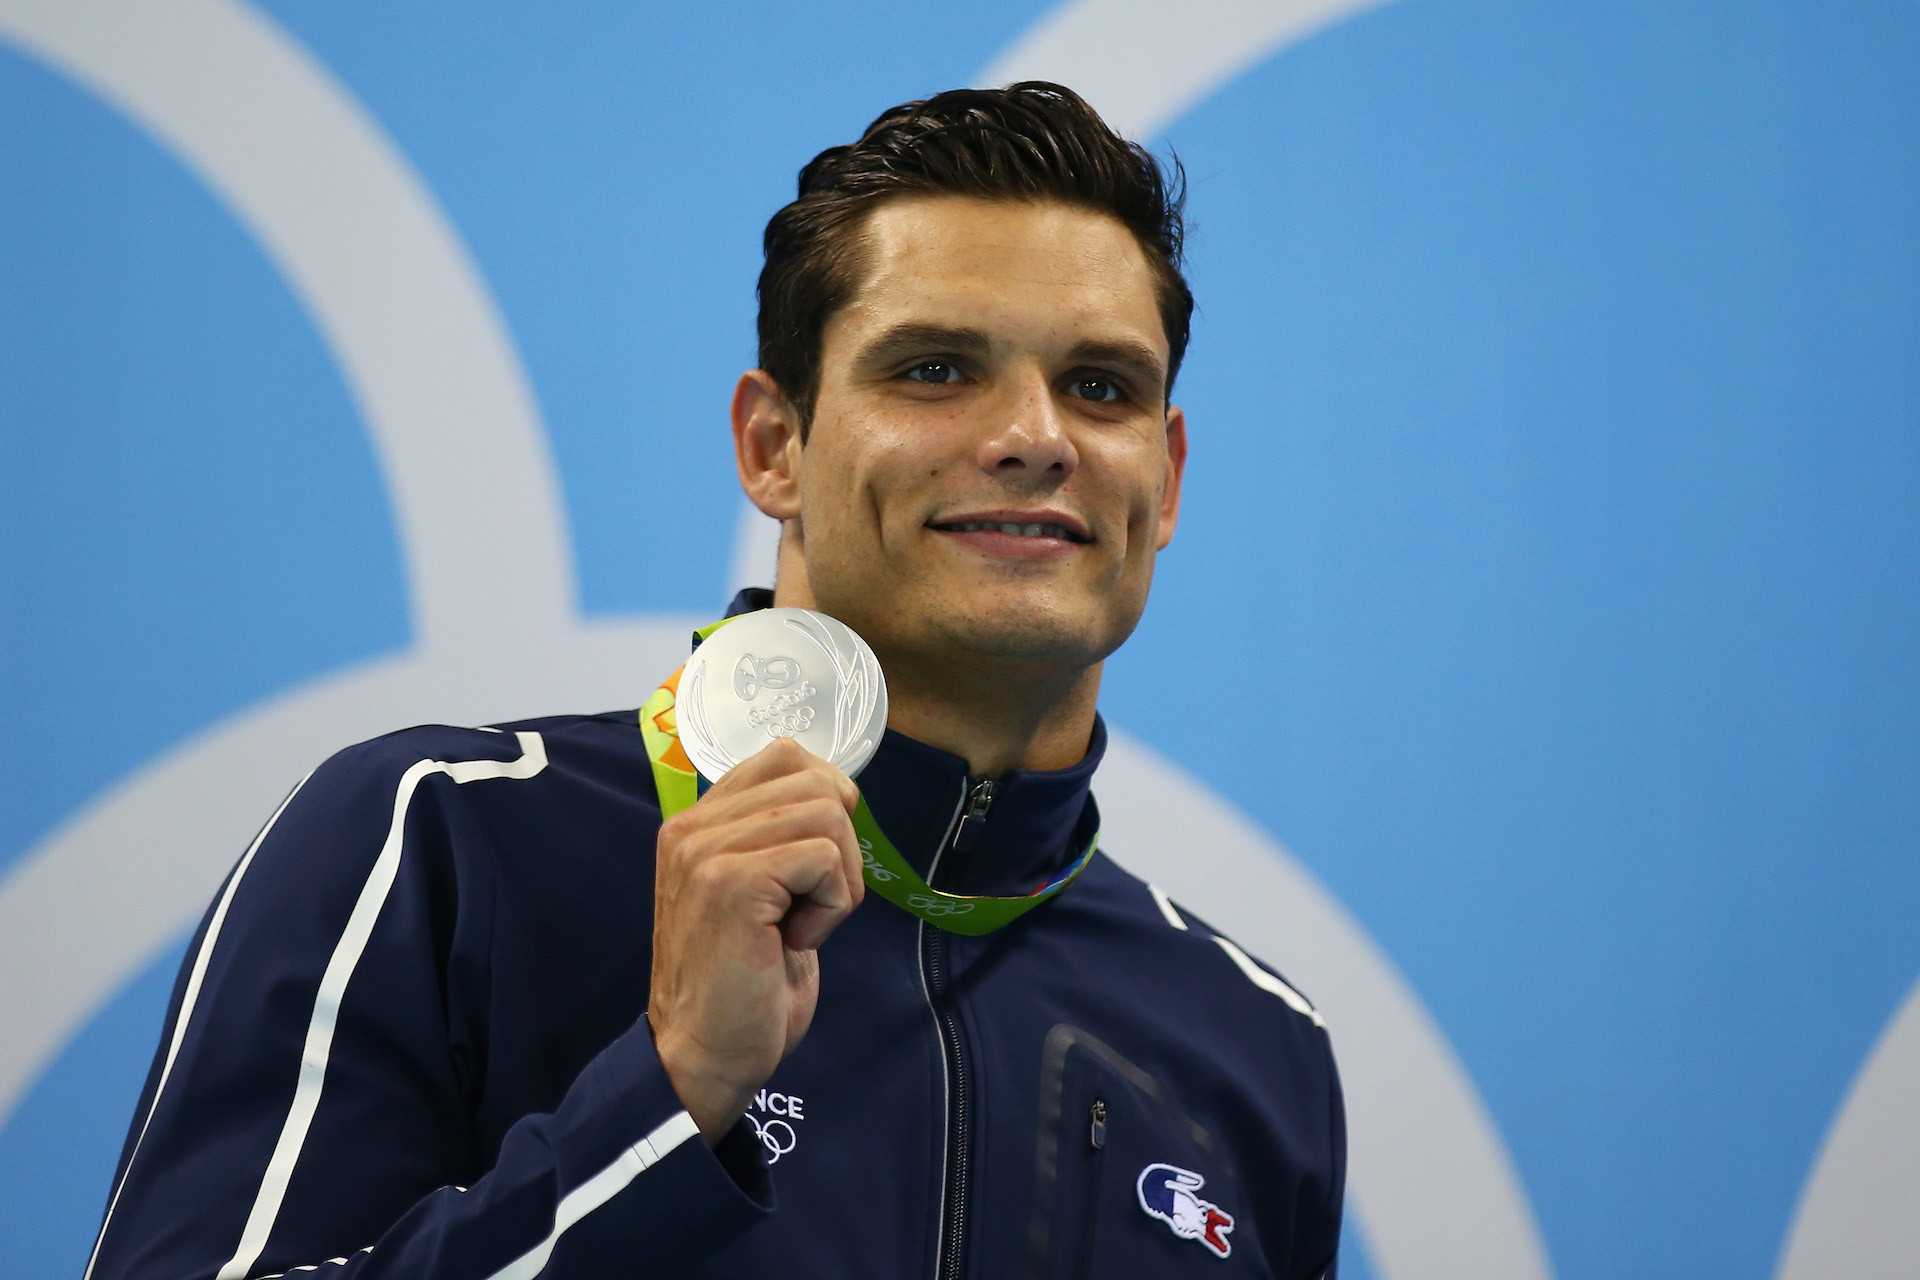 Florent Manaudou, the first Olympic torchbearer in France for Paris 2024